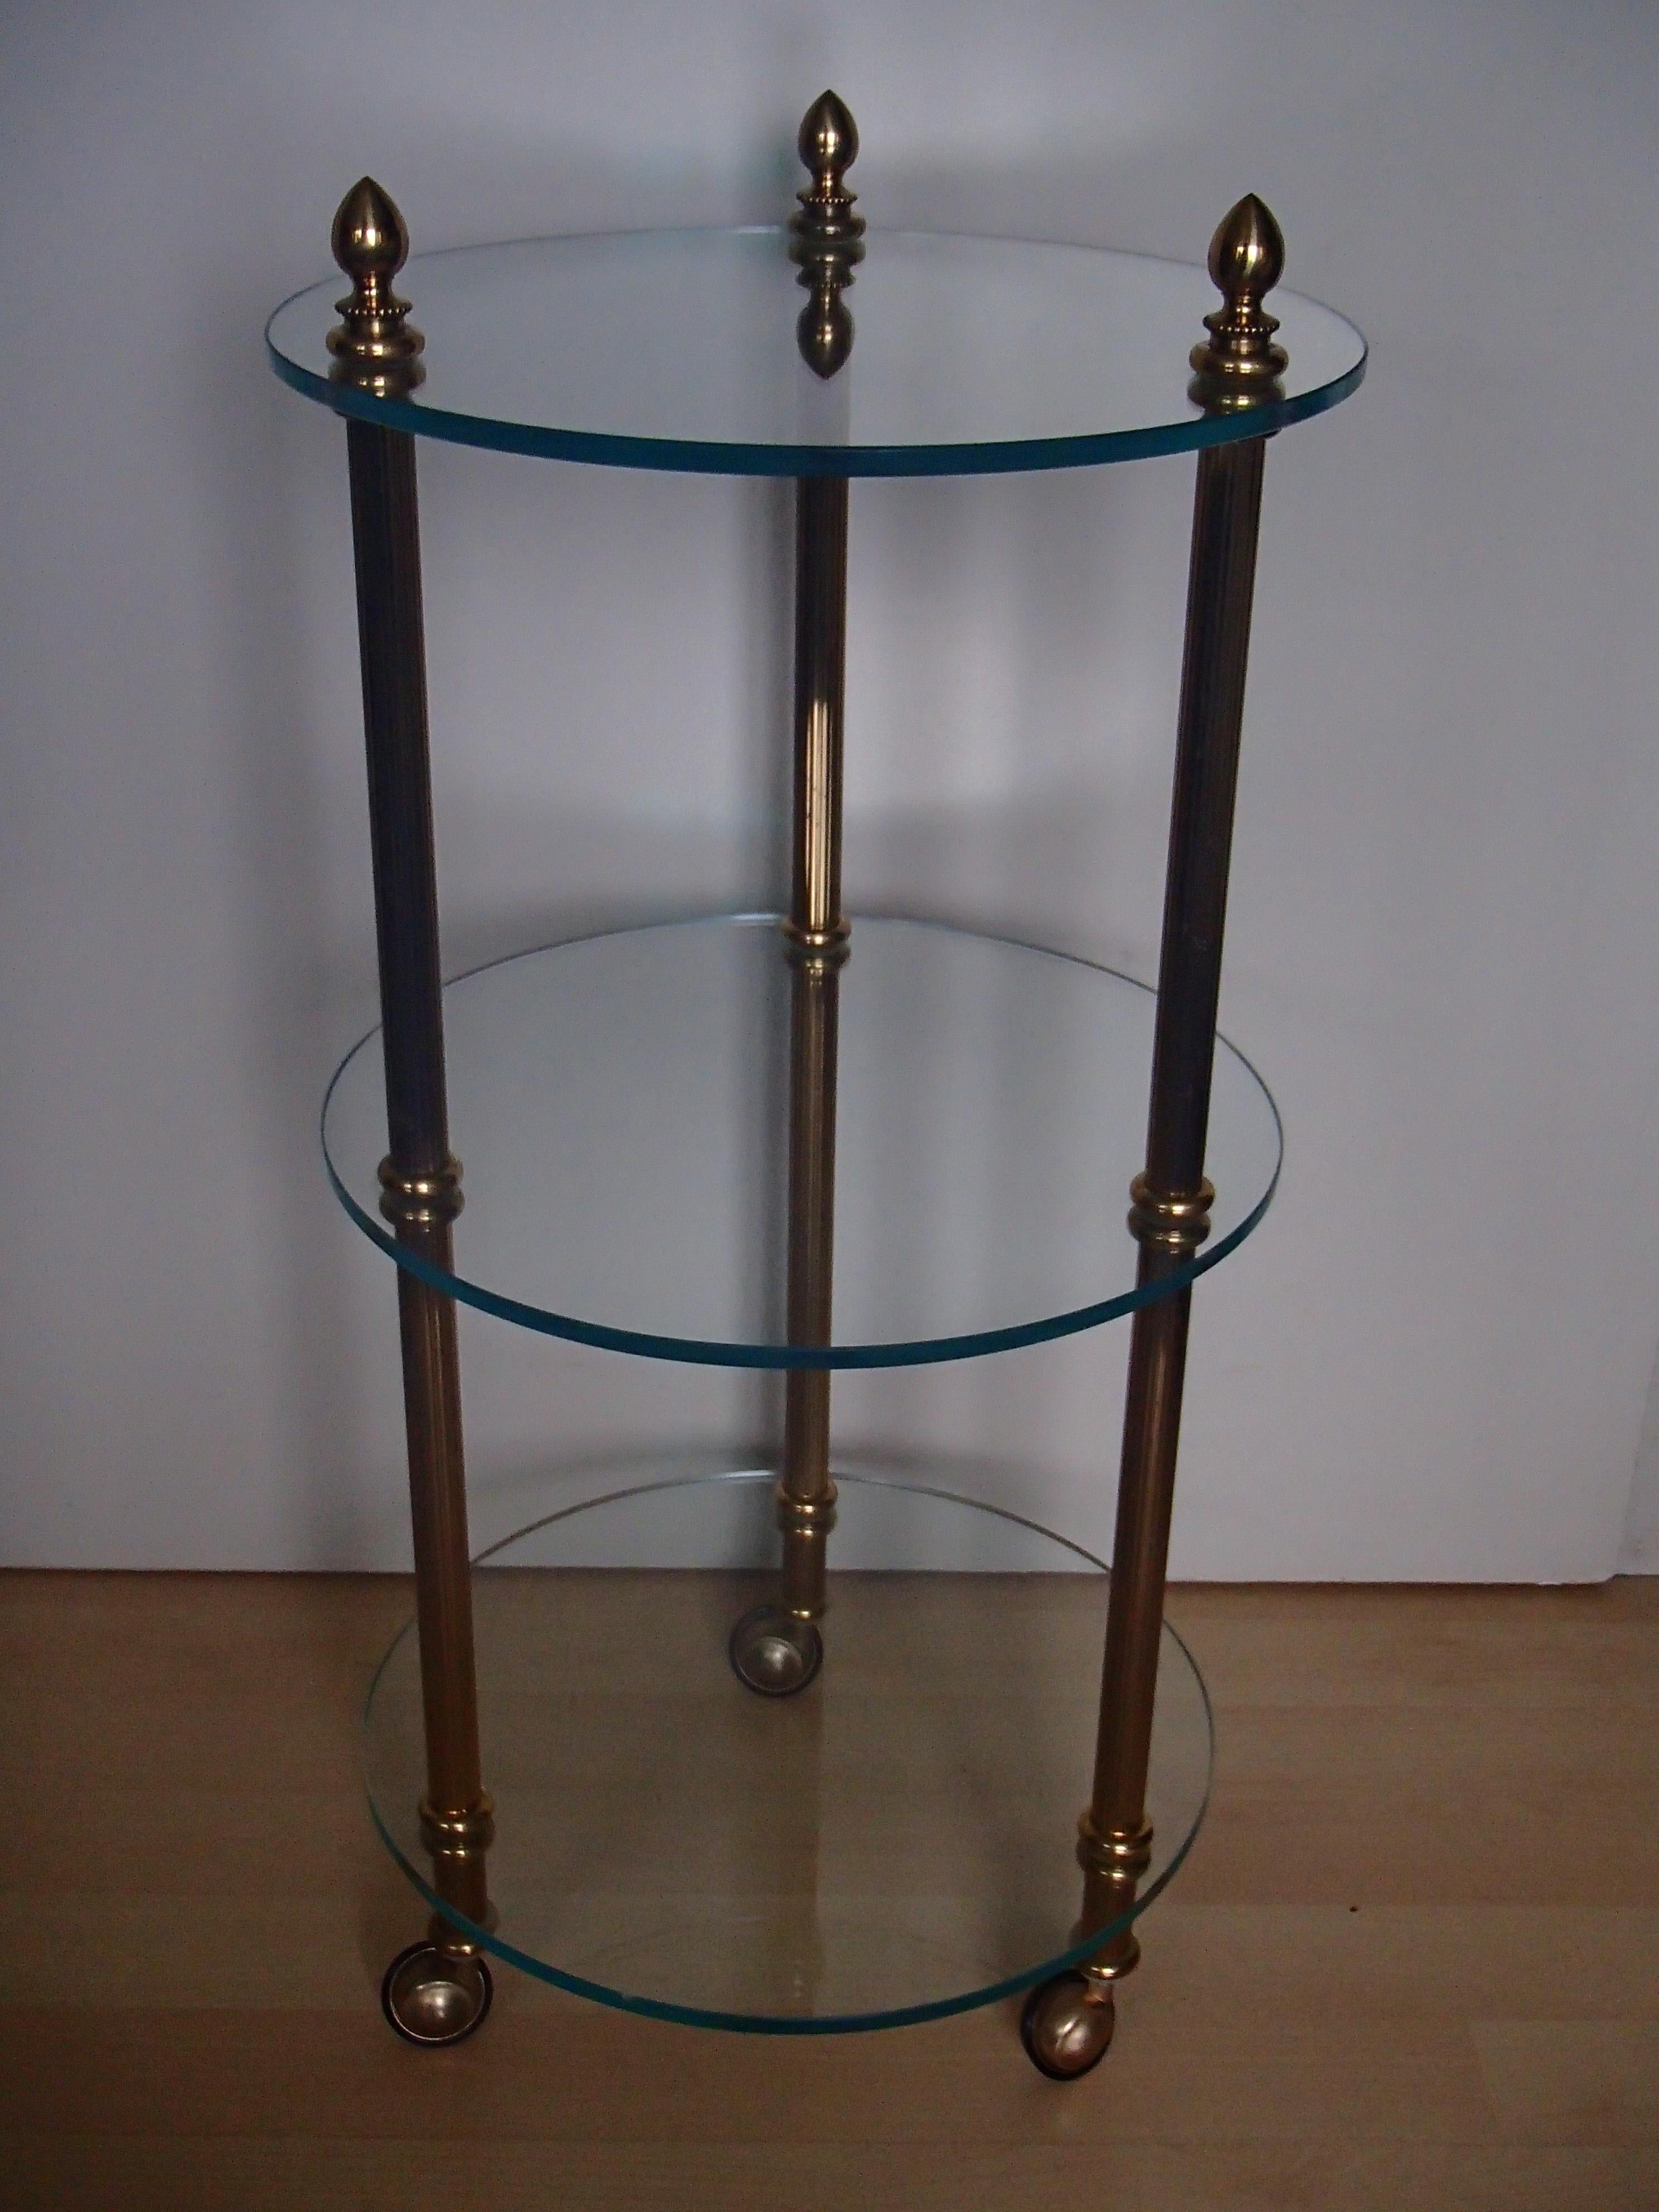 1980 this small round 3 top trolley brass and glass 
Heavy and high end quality.